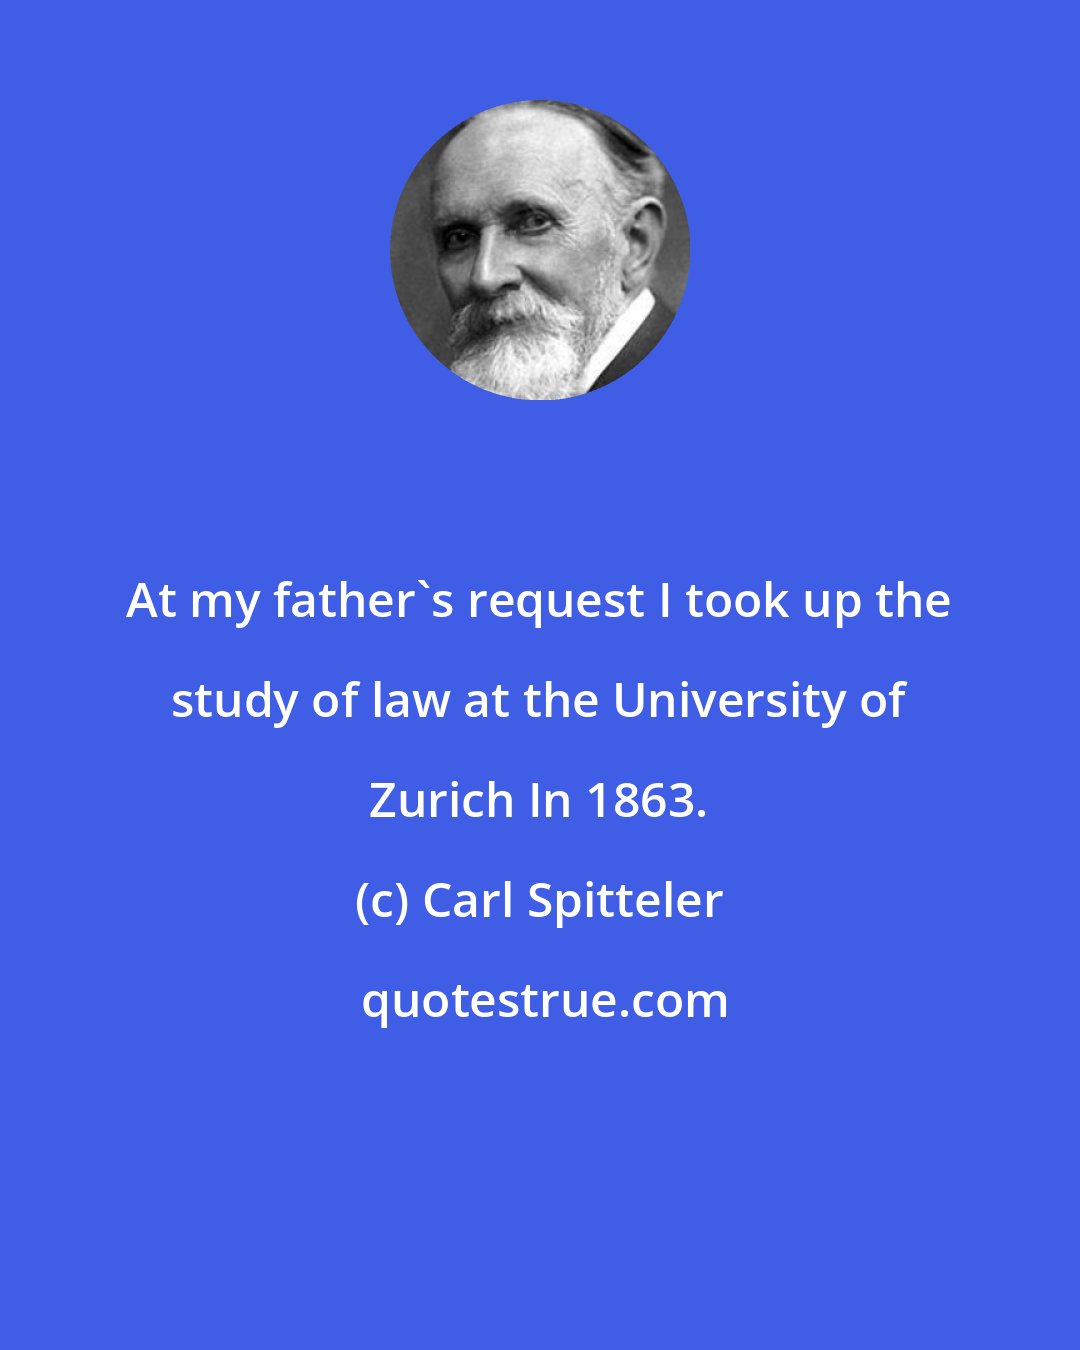 Carl Spitteler: At my father's request I took up the study of law at the University of Zurich In 1863.